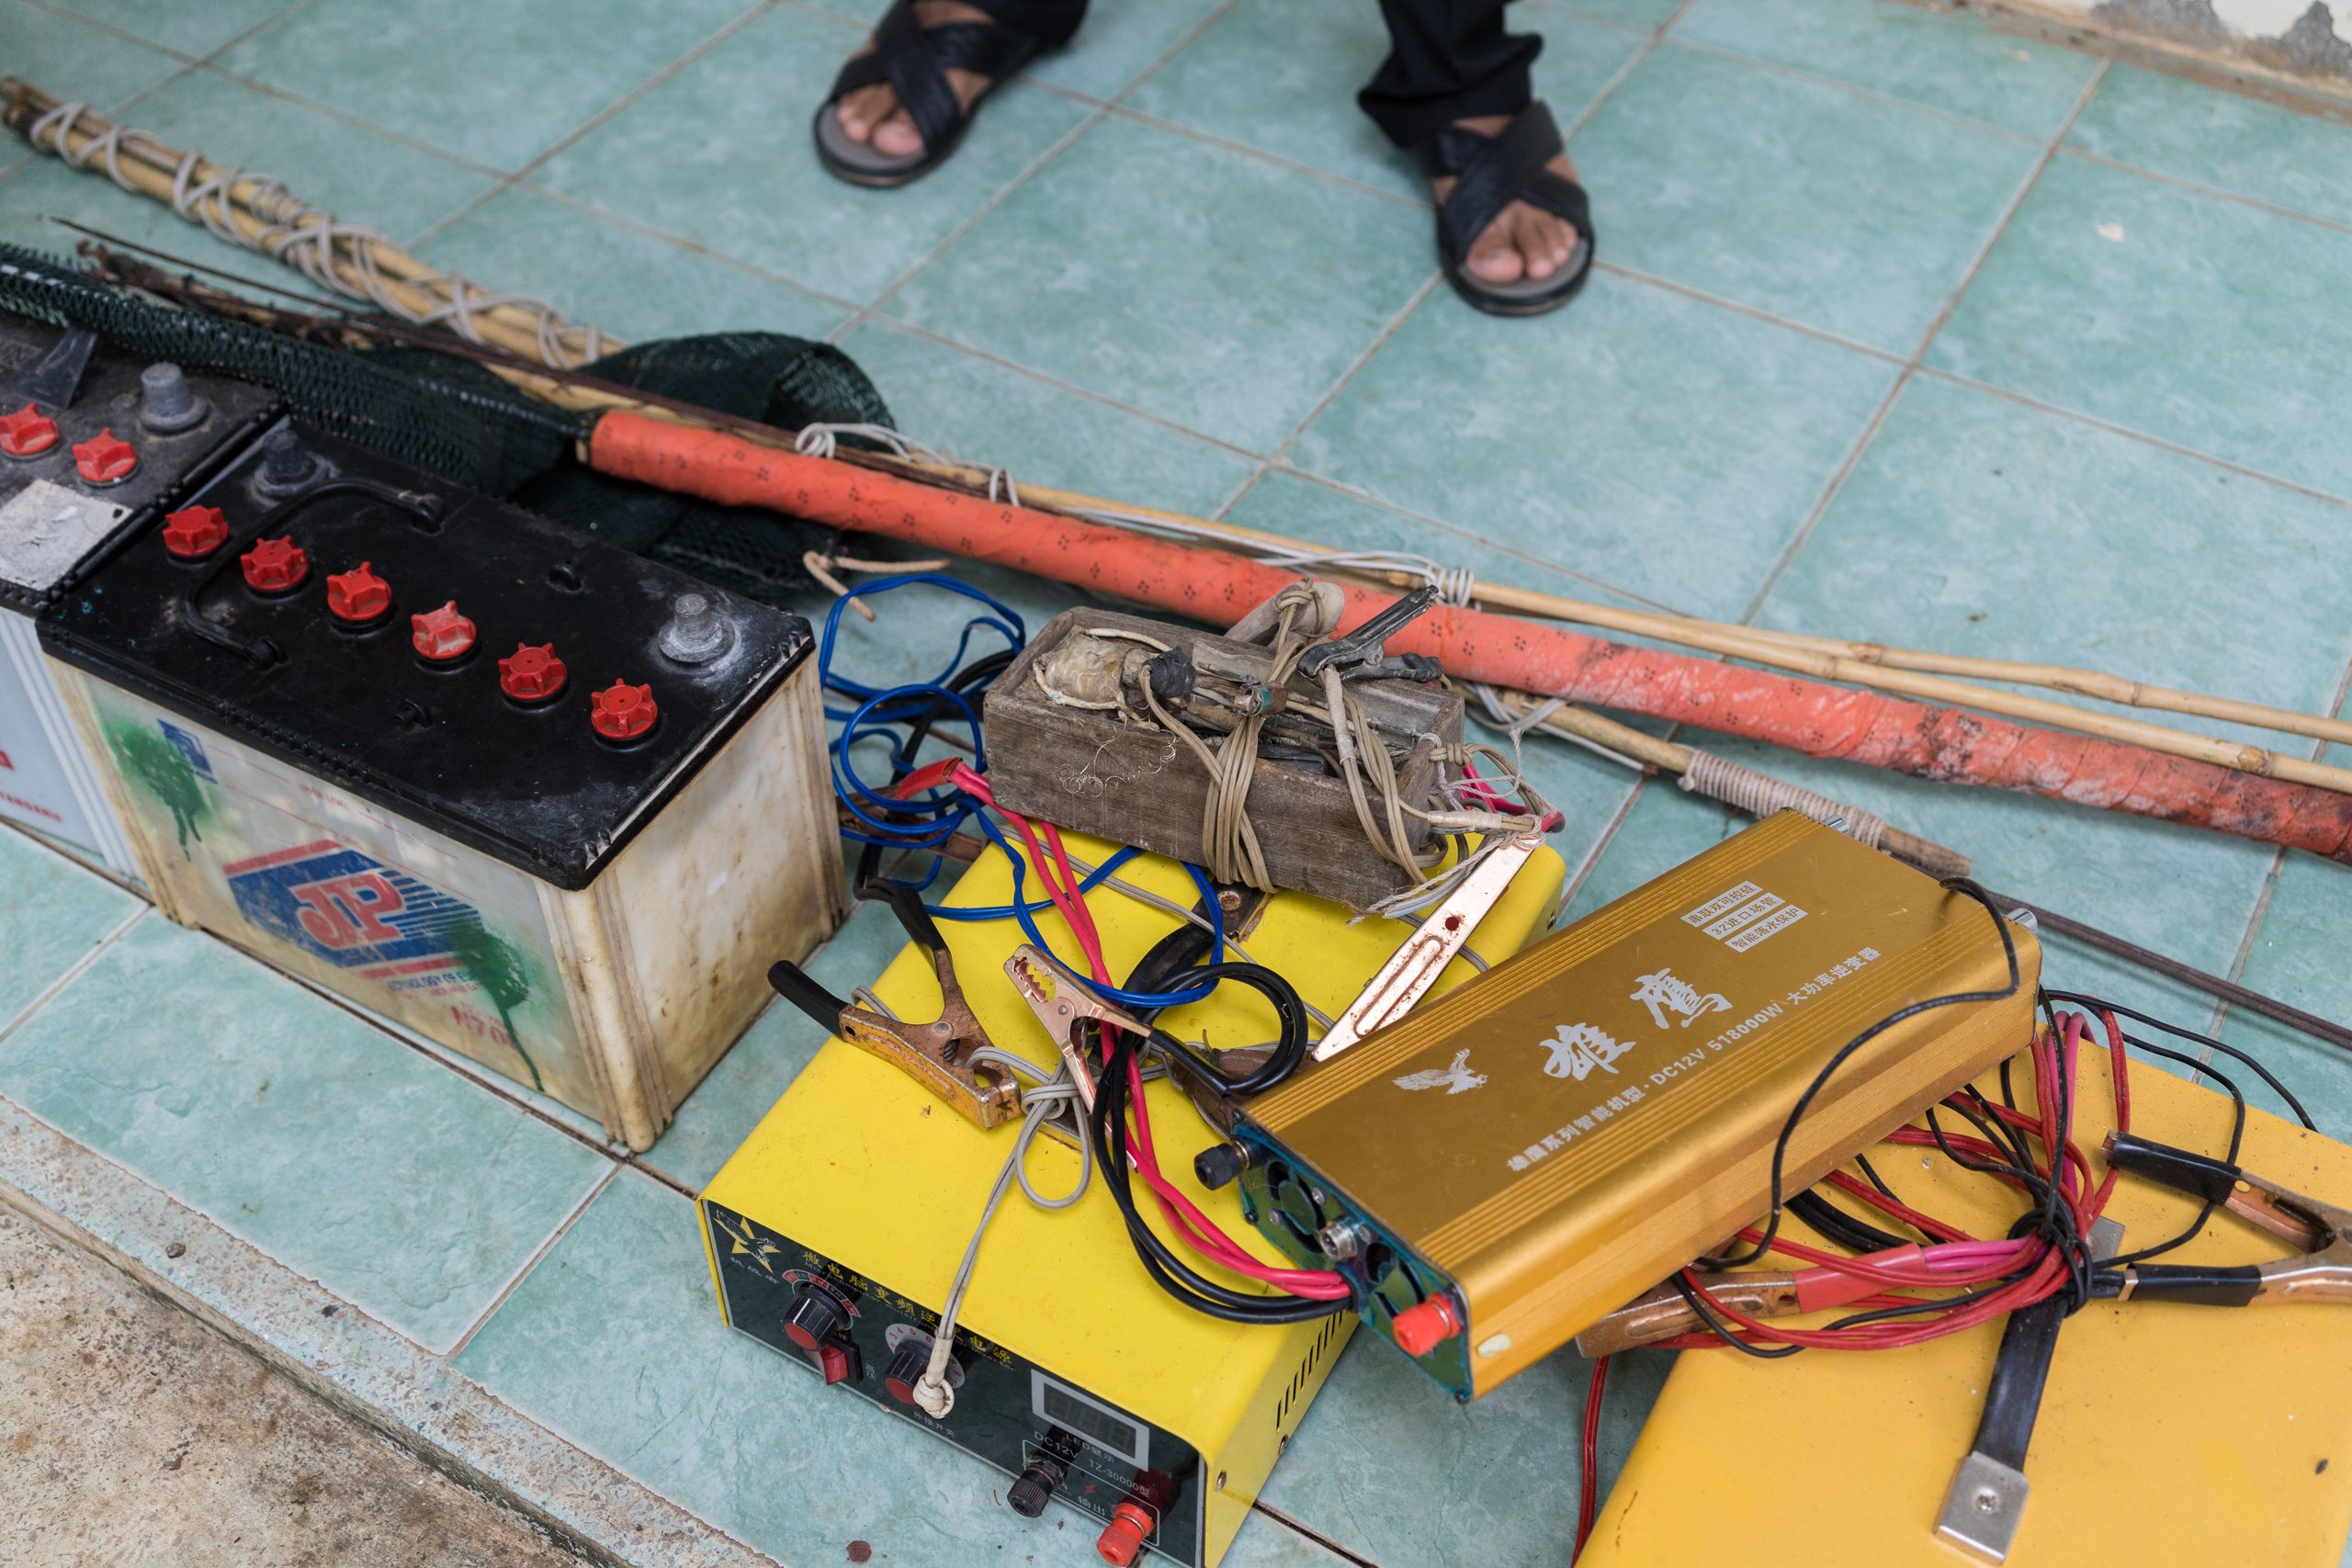 Electrofishing tools confiscated by Mekong River patrollers.